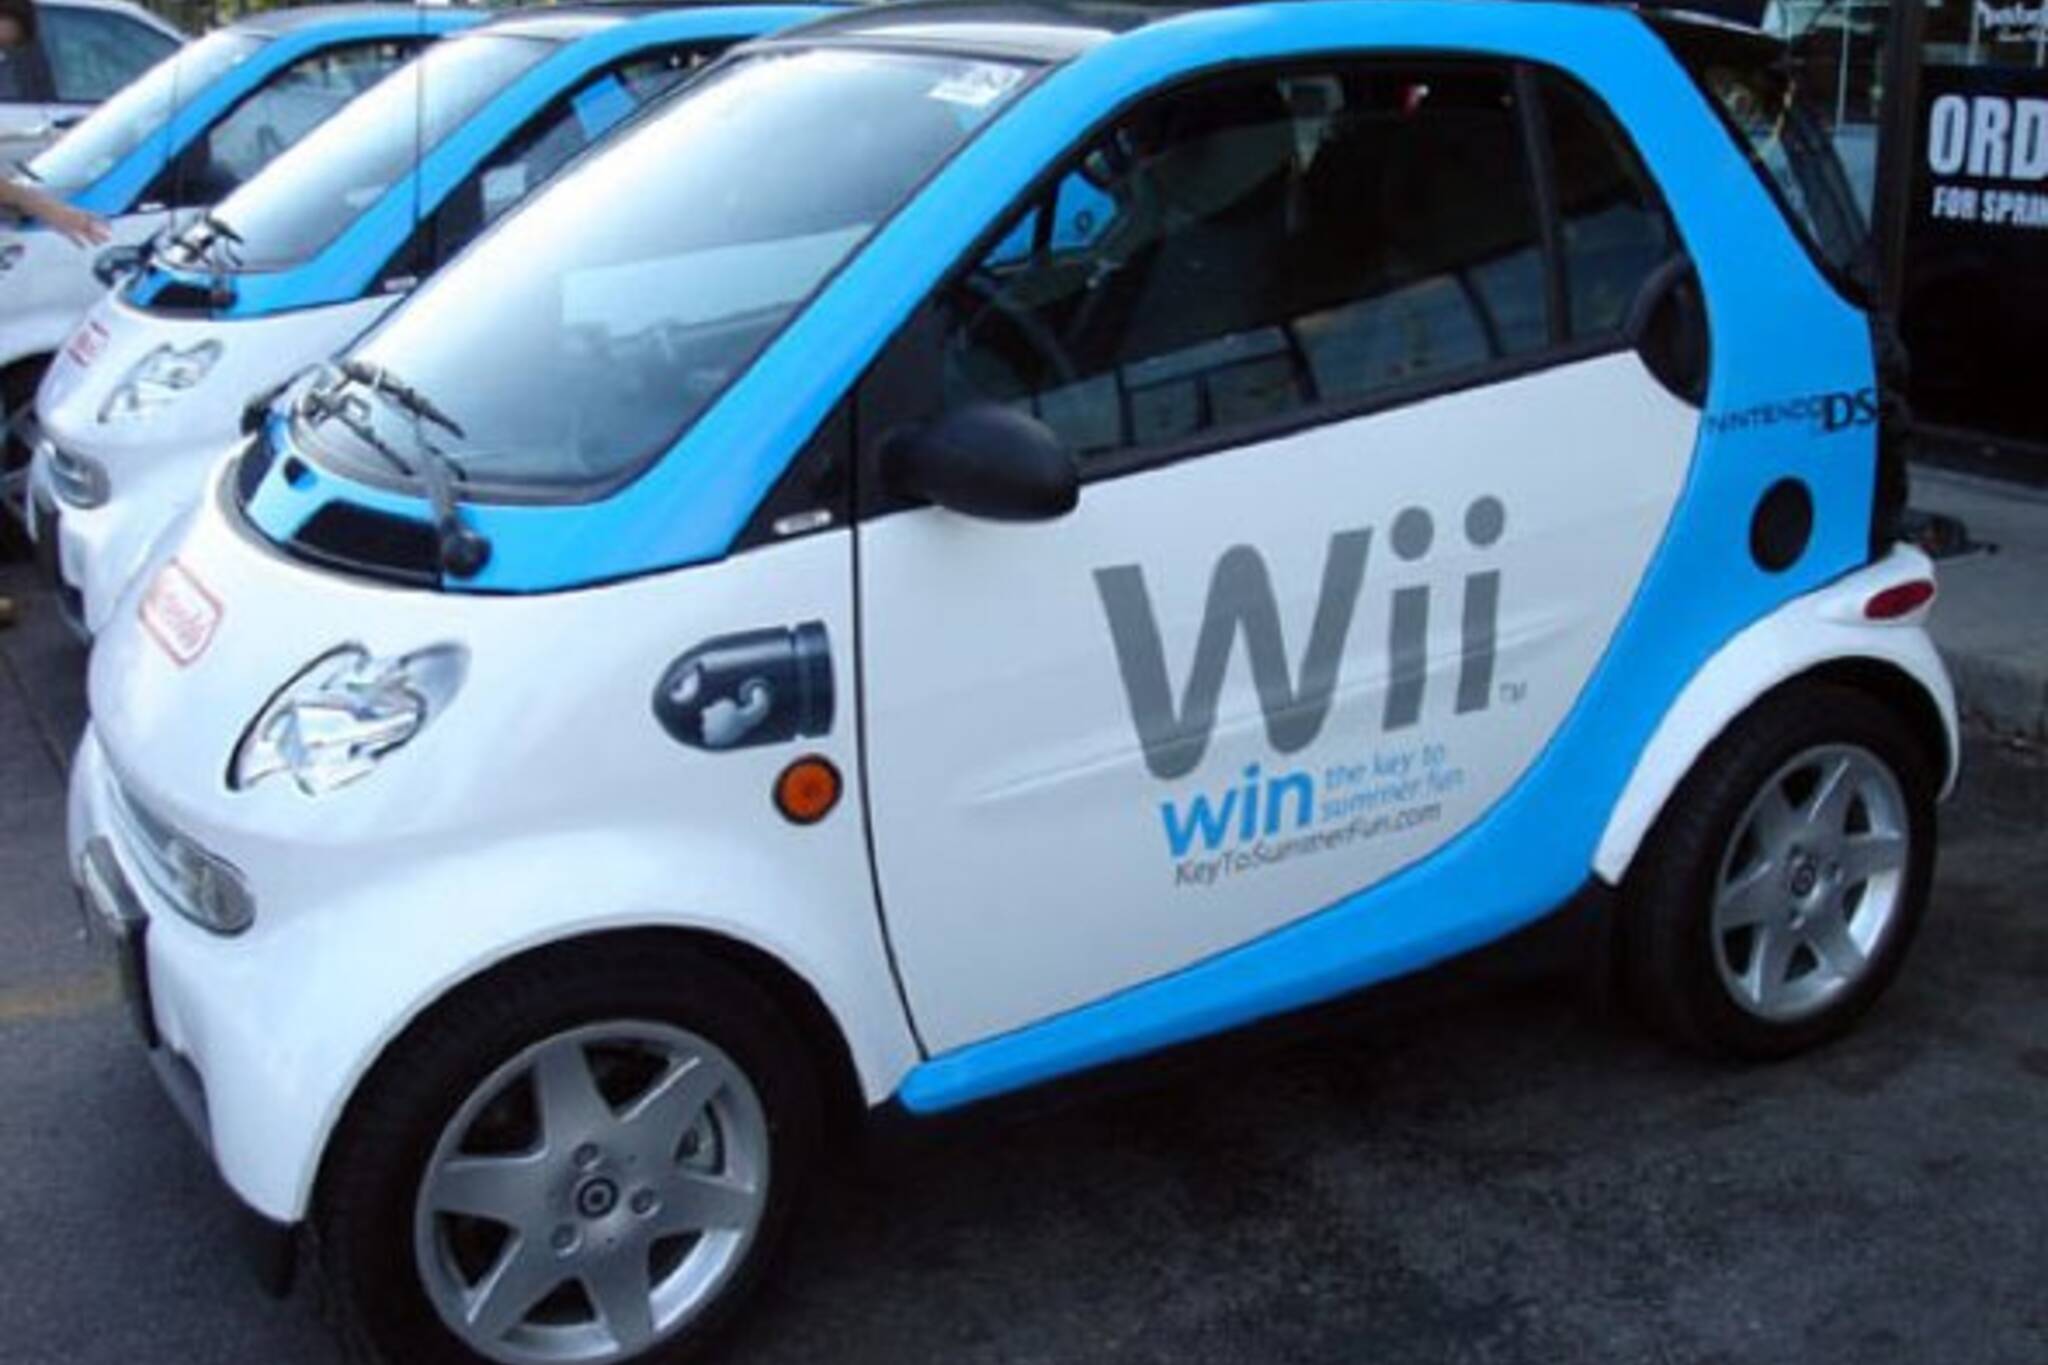 Wii Smart Cars Coming to Toronto